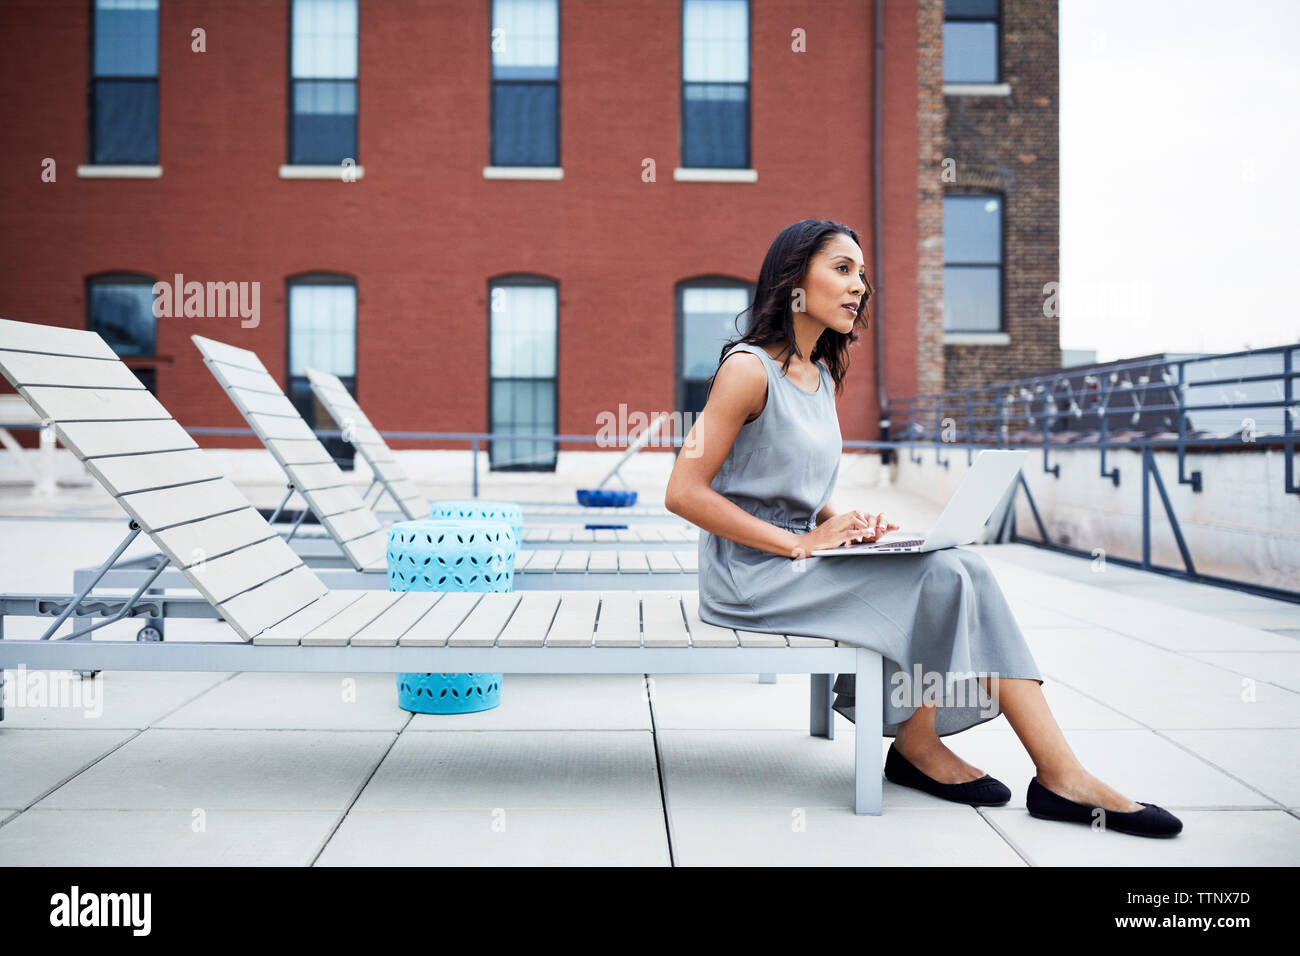 Thoughtful businesswoman with laptop computer sitting on lounge chair at building terrace Stock Photo